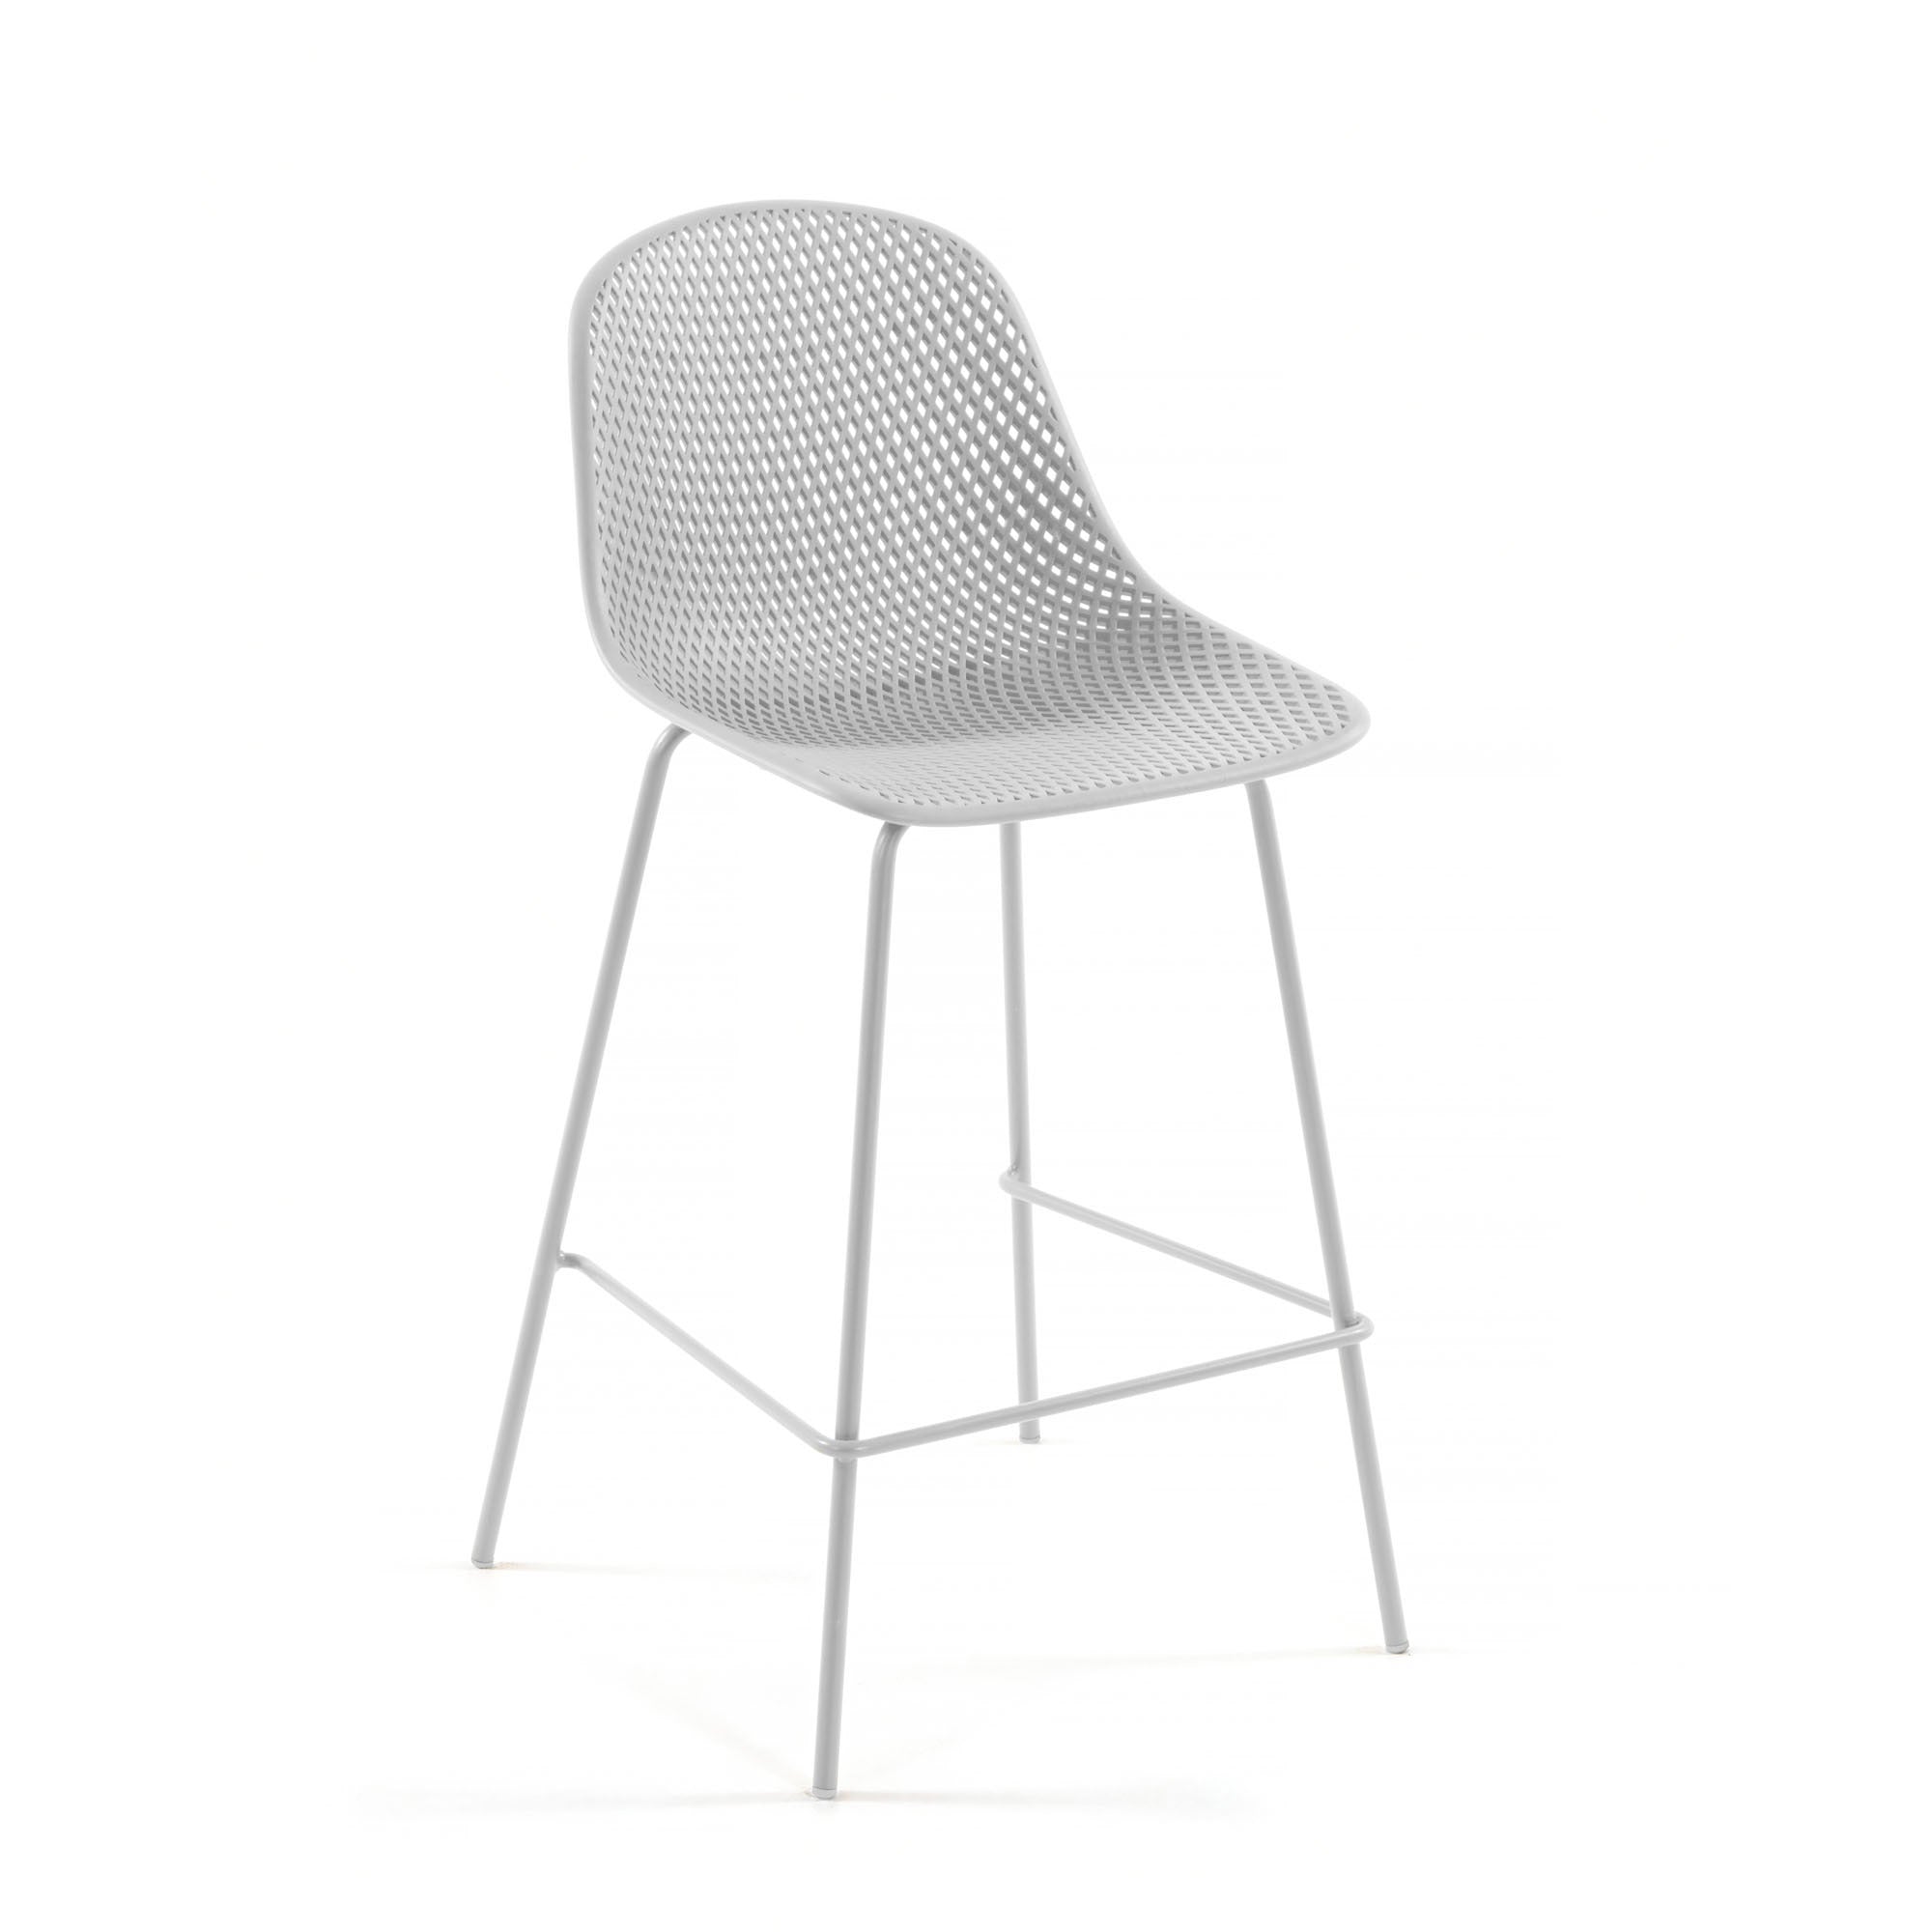 Quinby outdoor stool in white, height 75 cm